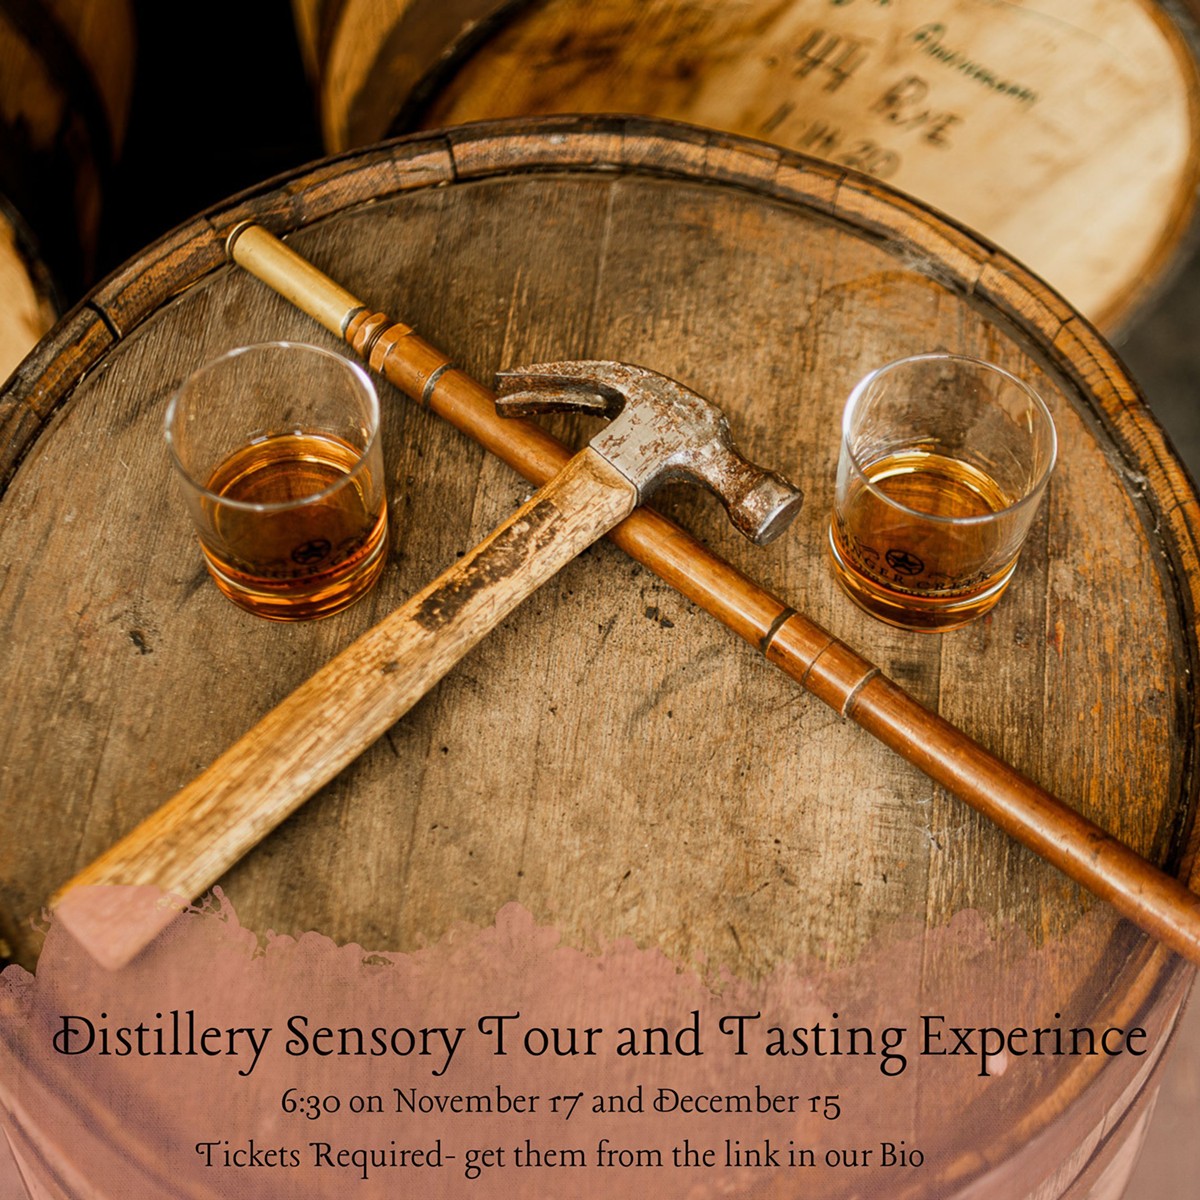 Experiences, Tours and Tastings